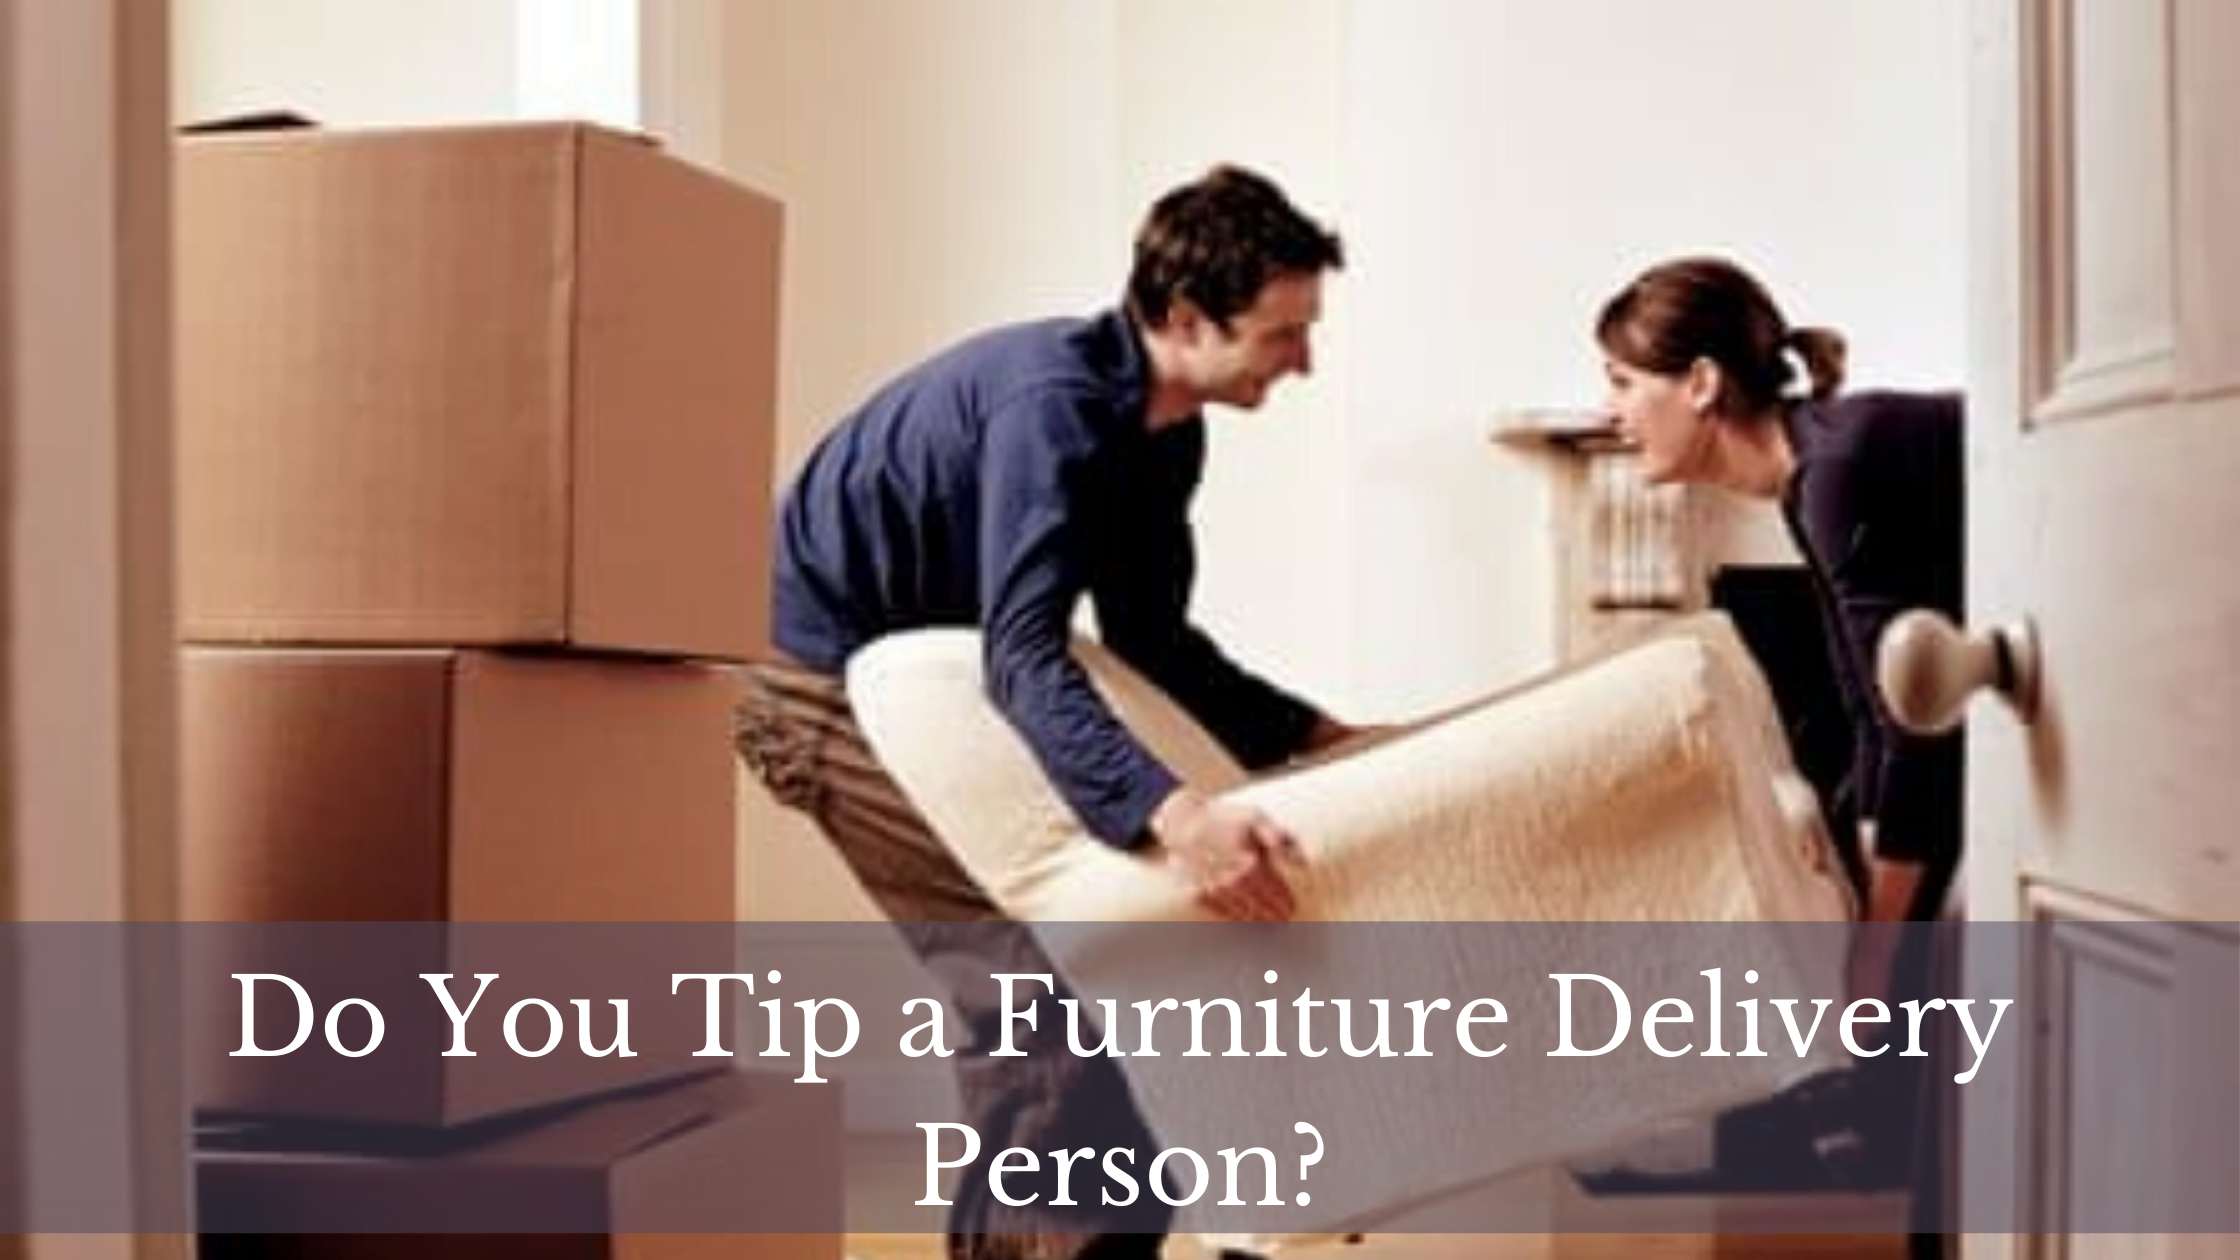 Do you Tip a Furniture Delivery Person?